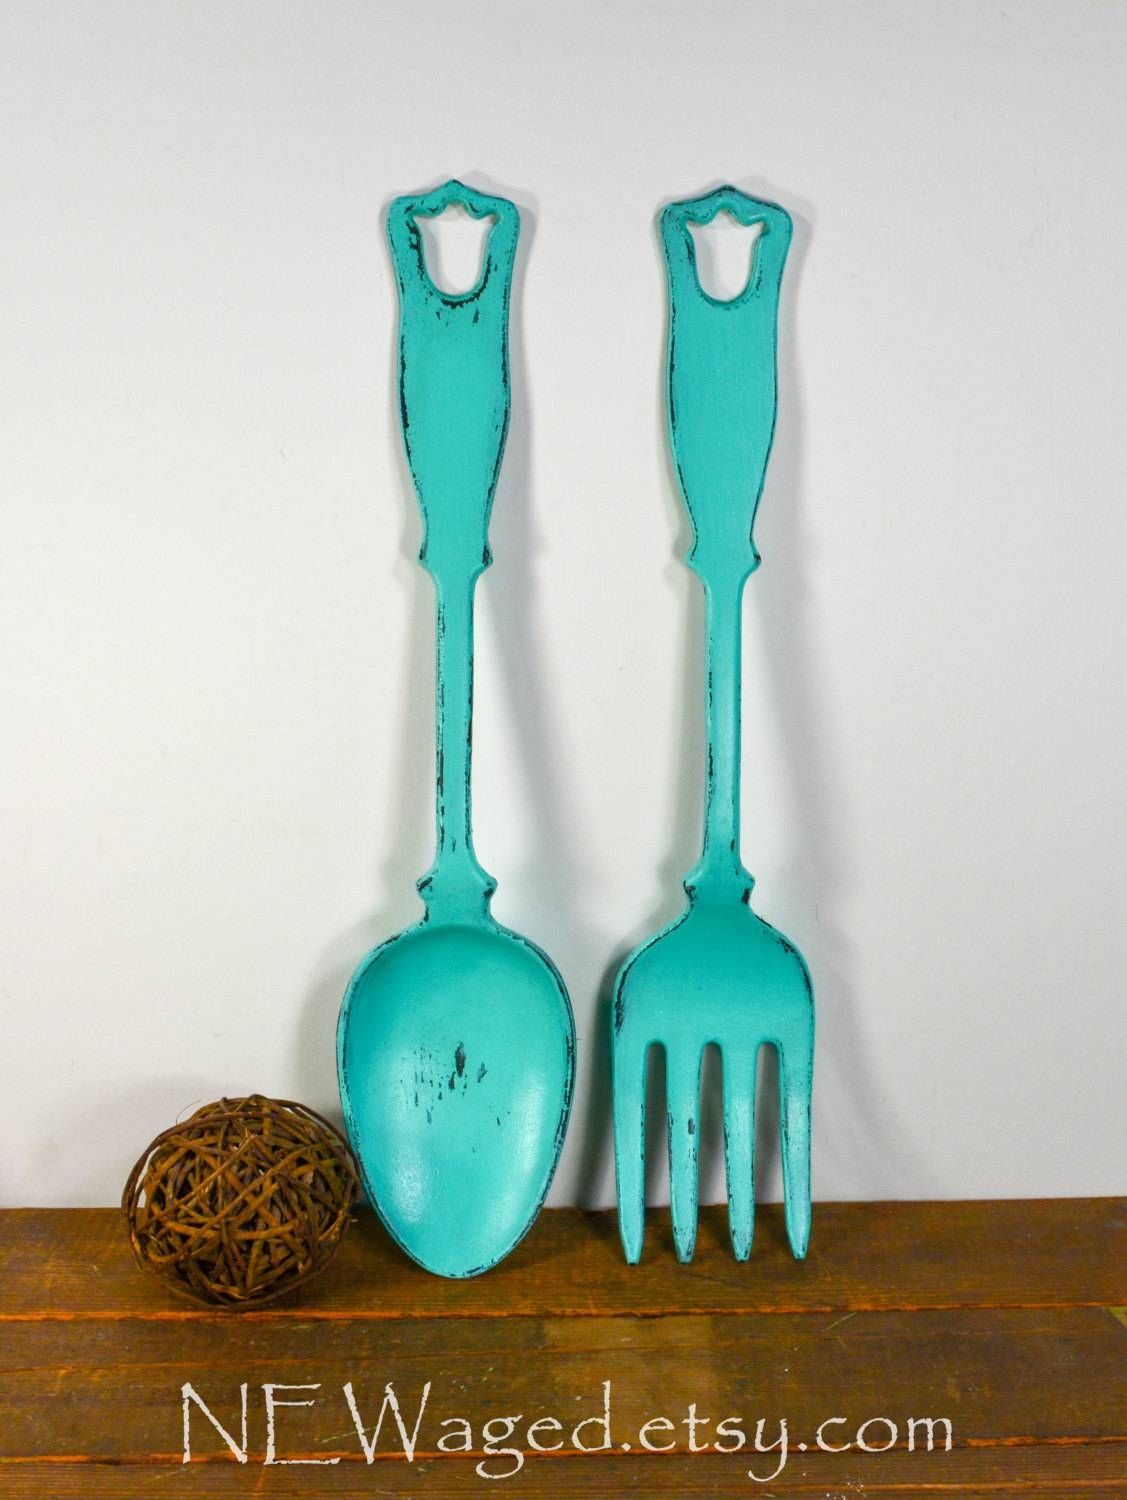 Oversized Spoon And Fork Wall Decor | Home Decor And Design With Most Recent Big Spoon And Fork Wall Decor (Gallery 26 of 30)